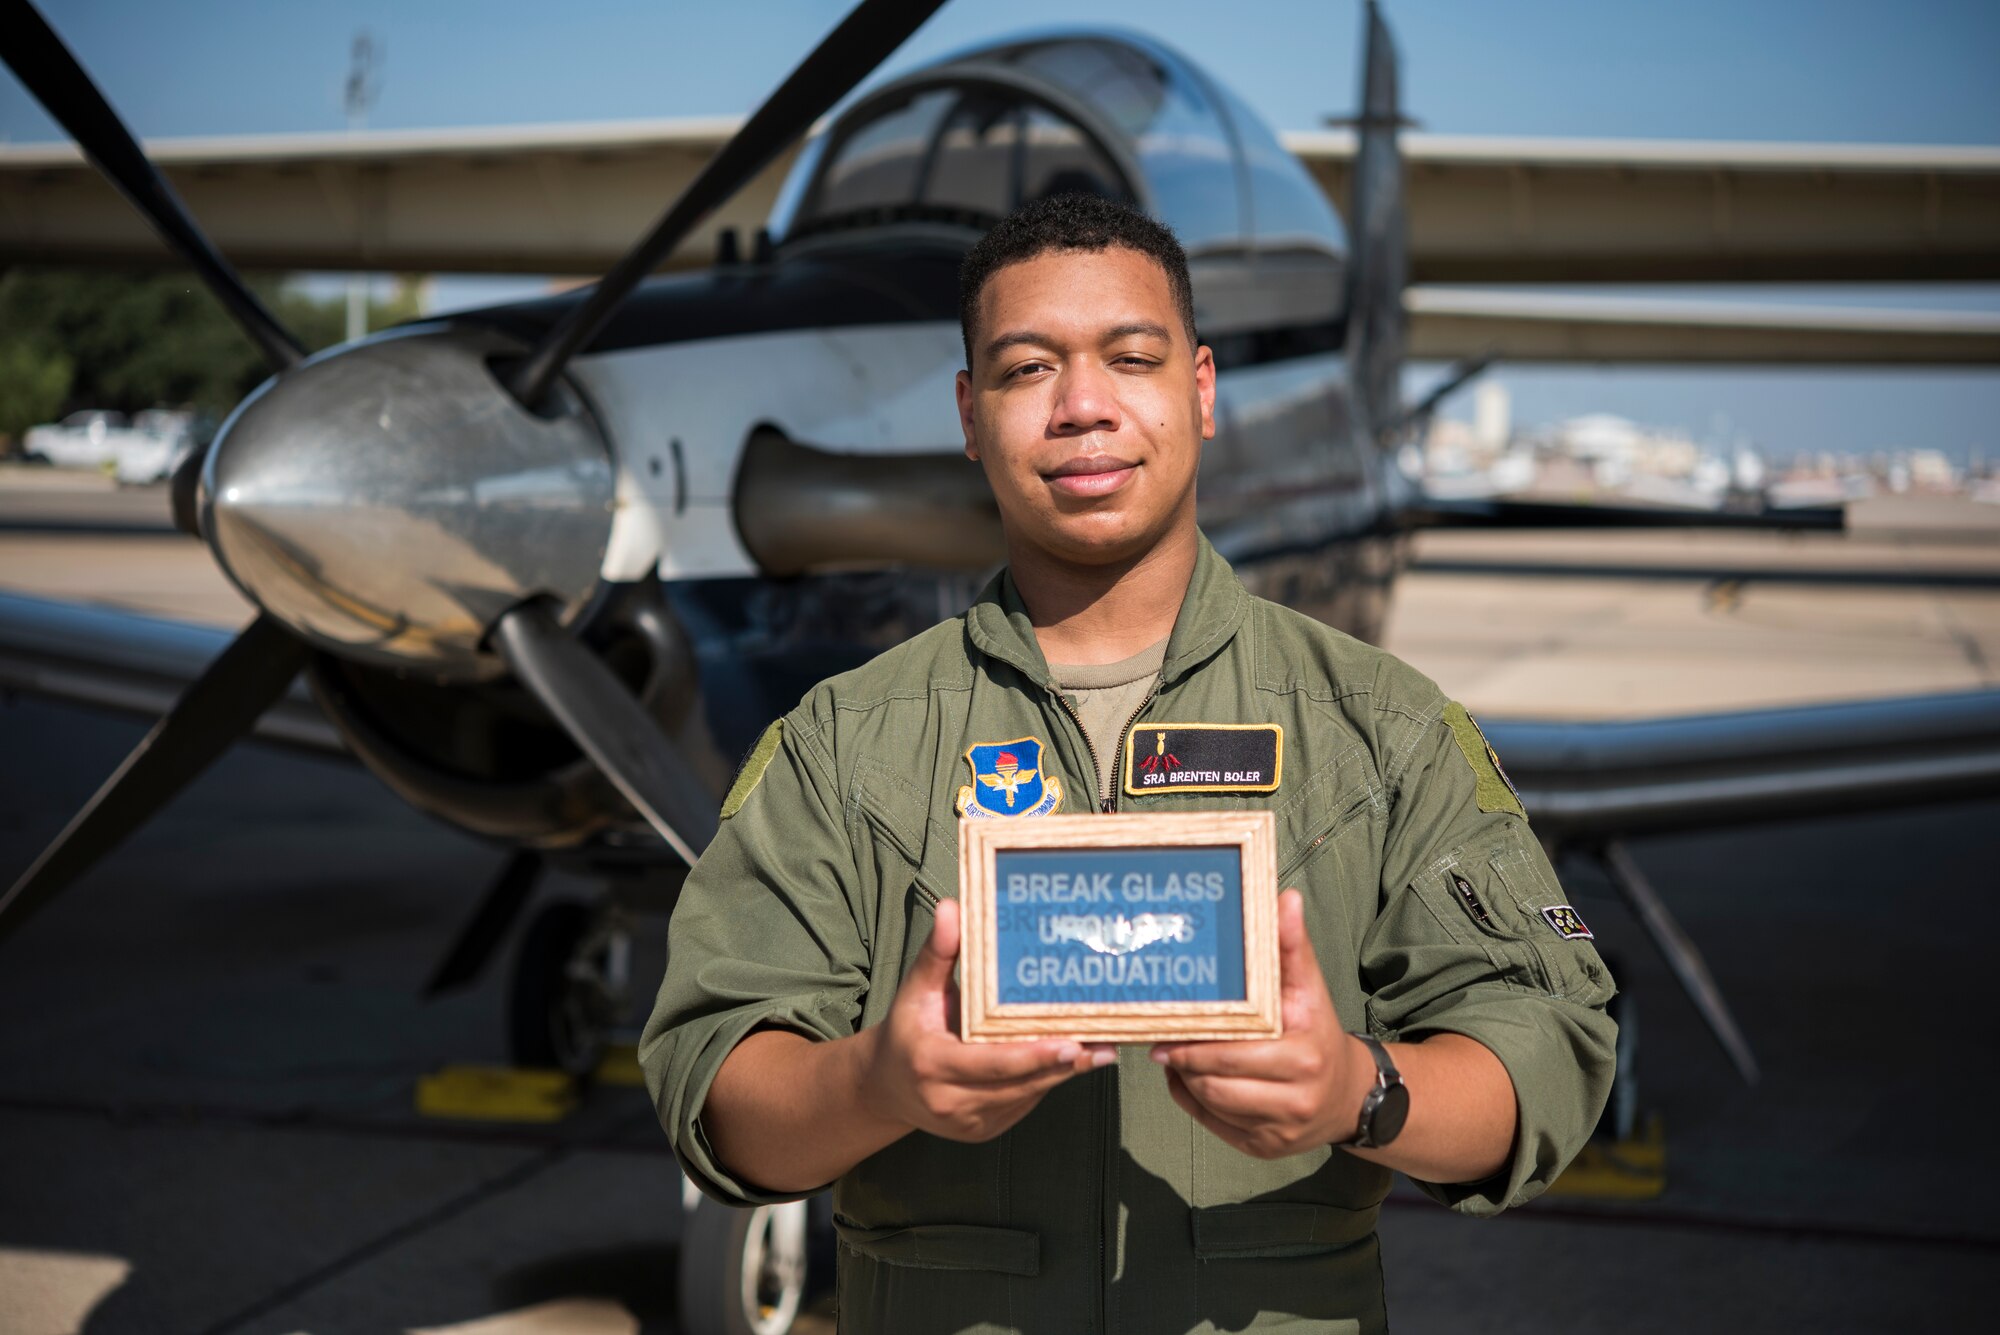 Senior Airman Brenten Boler, 47th Operations Group T-6 simulator instructor, stands on the flightline in front of a T-6A Texan II on August 28, 2020 at Laughlin Air Force Base, Texas. Boler was selected for Pilot Training Next while he was in technical training to become an Air Force linguist, and he graduated pilot training August 31, 2019. (U.S. Air Force photo by Senior Airman Anne McCready)